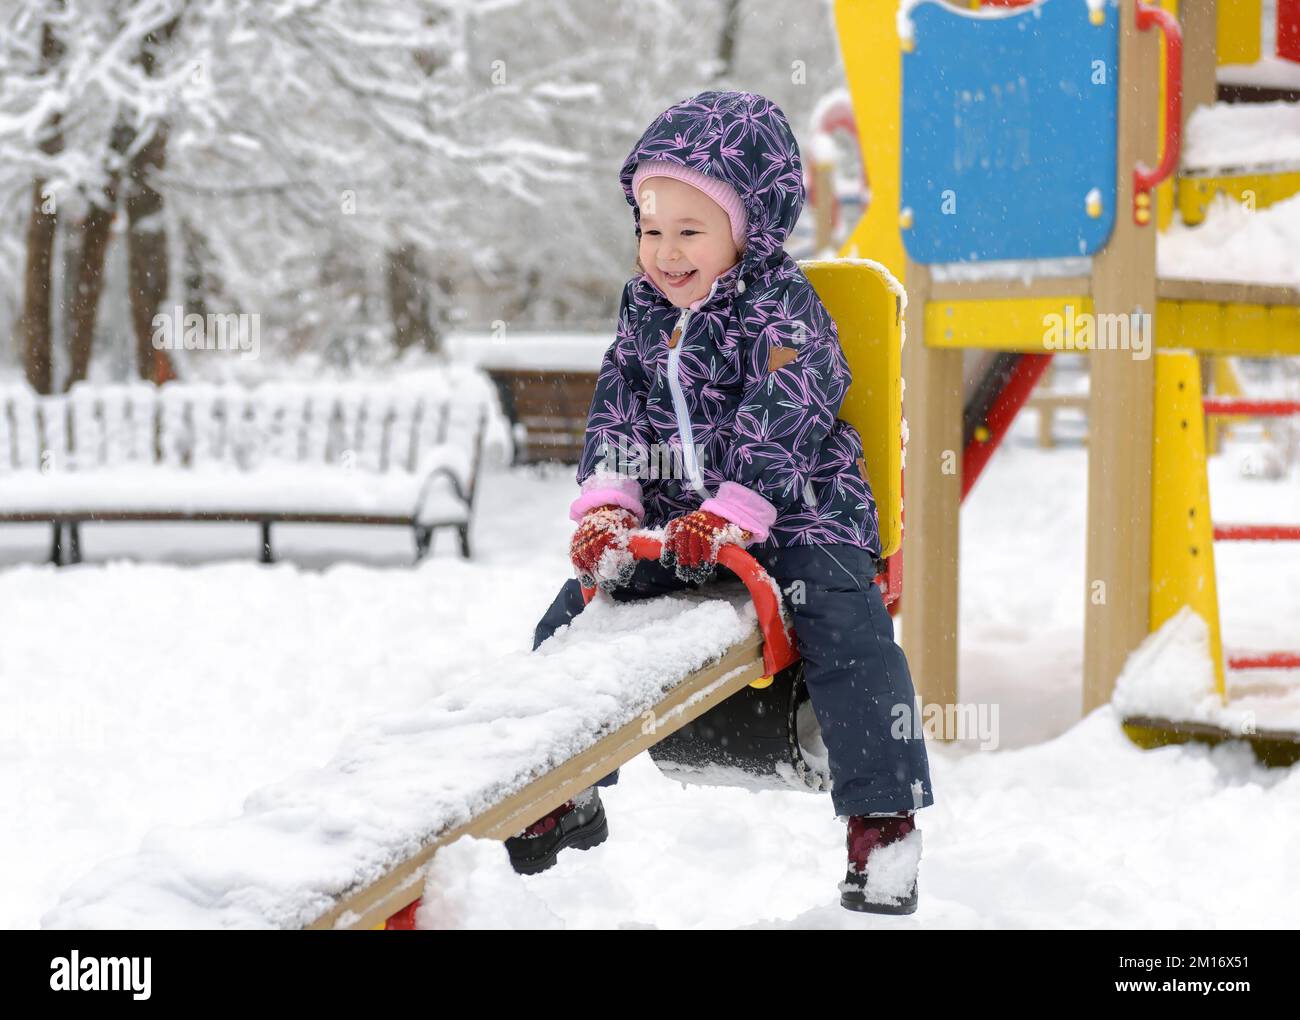 Child having fun on seesaw in winter, happy baby girl playing in snowy park. Little kid is on playground outdoor. Theme of snow, winter, game, cold an Stock Photo